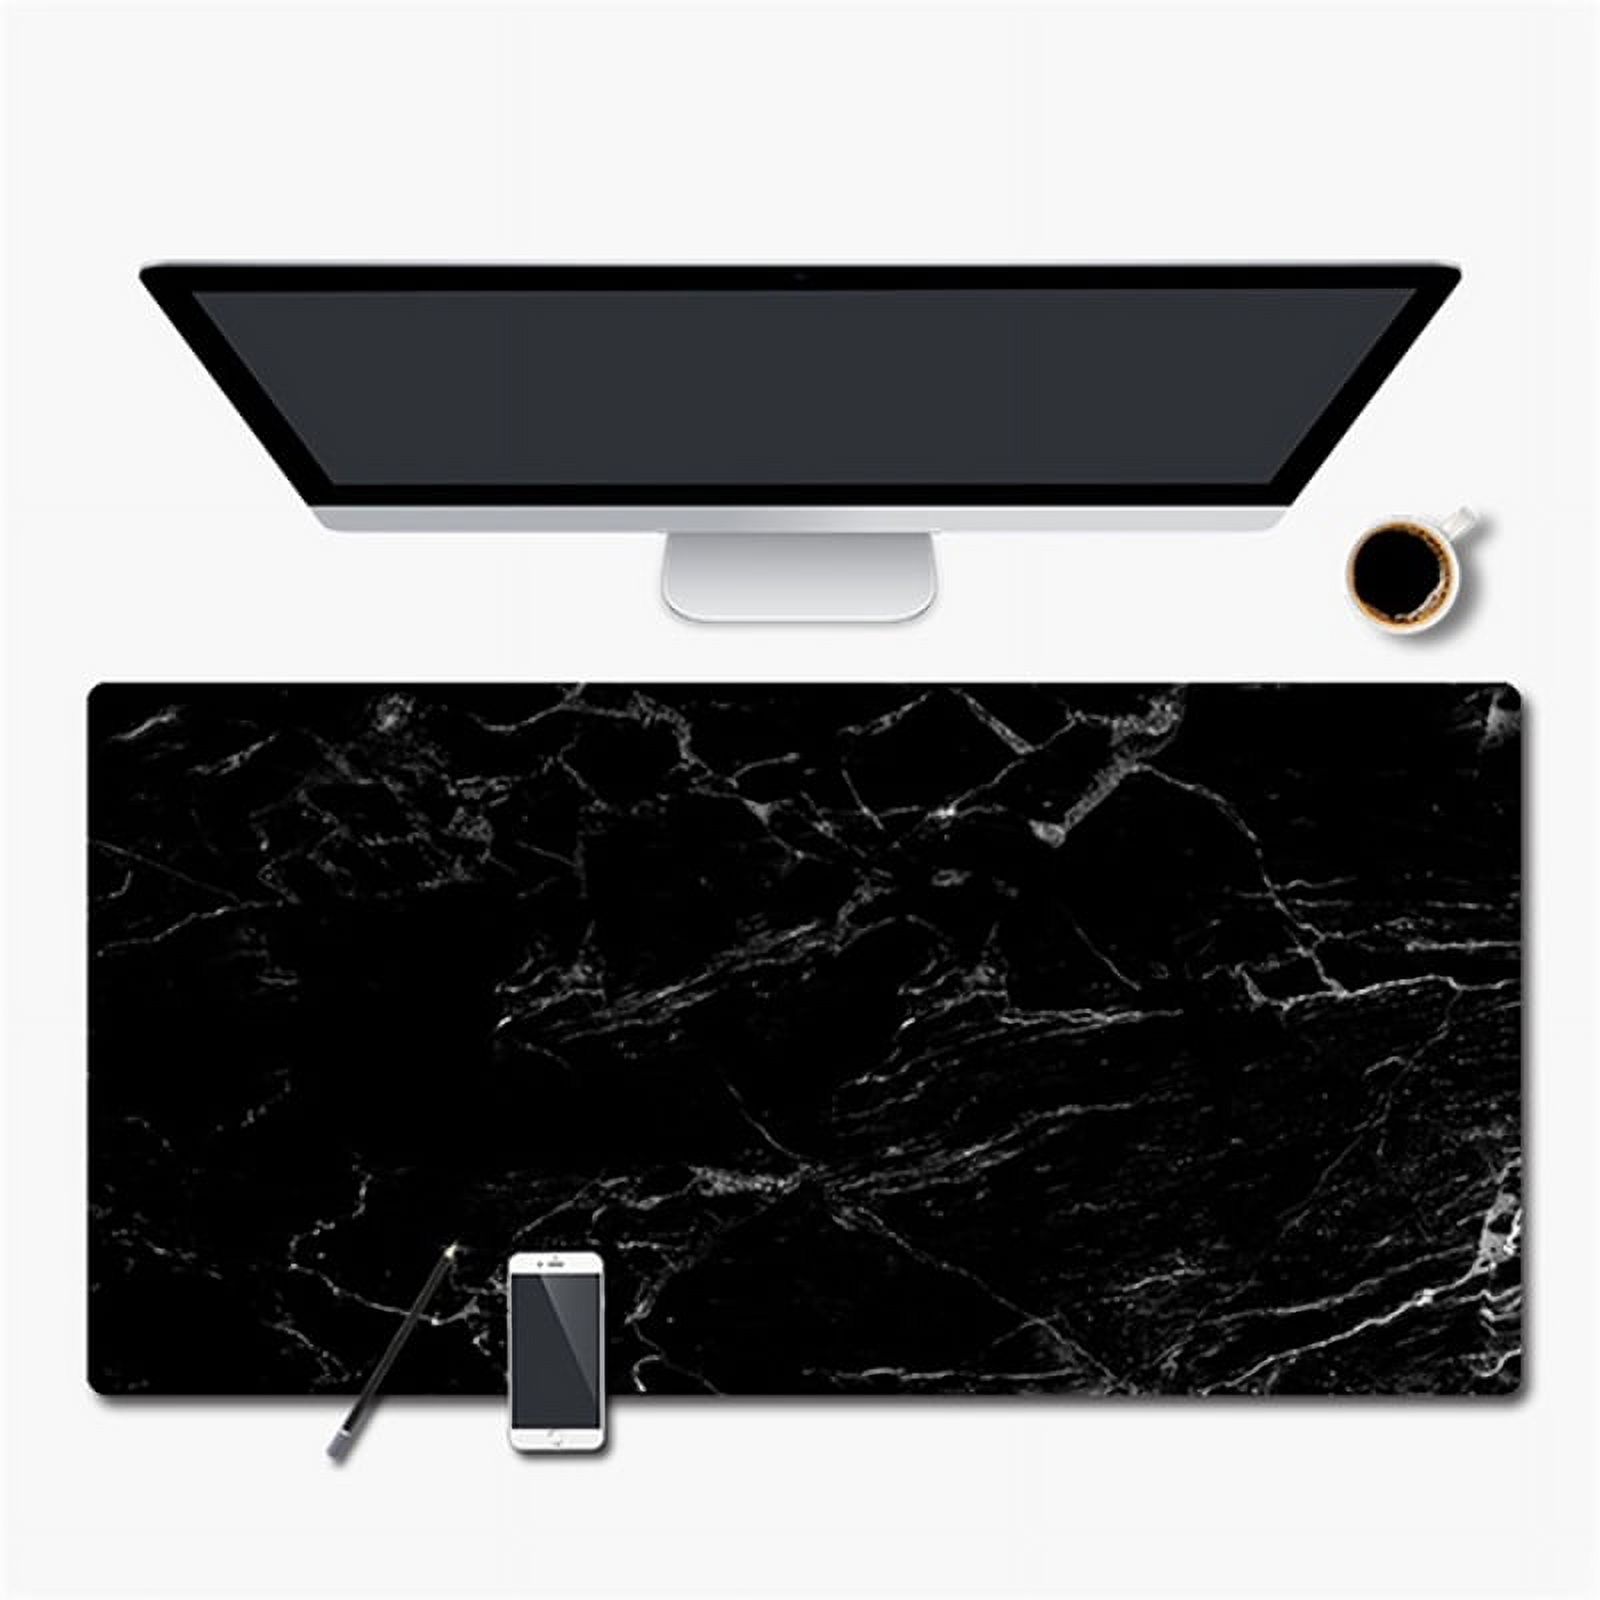 Extended Gaming Mouse Pad, Table Rubber Marble Grain Computer Desk Mat Laptop Cushion Keyboard Mouse Pad for Work and Game - image 4 of 5